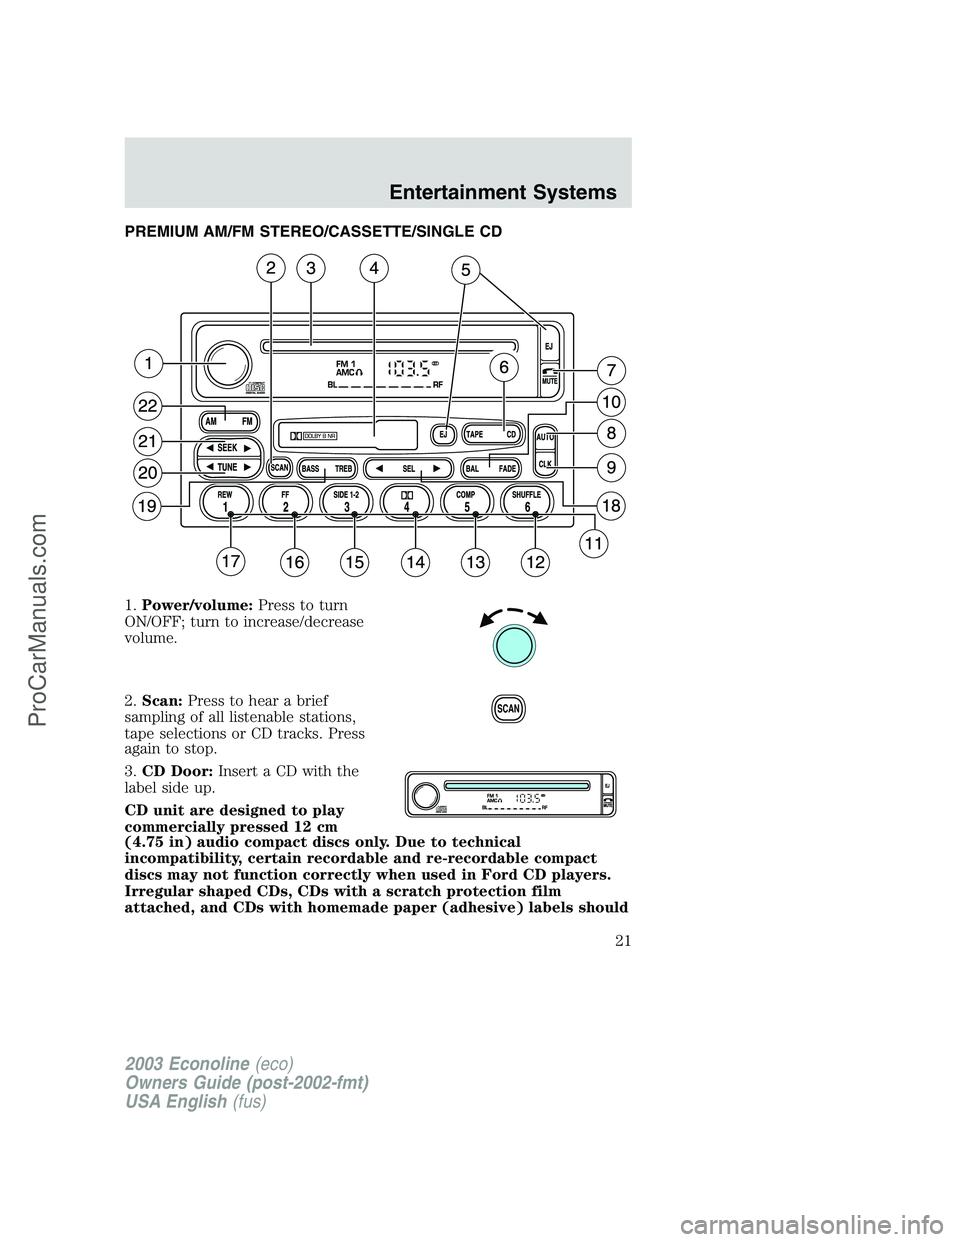 FORD E-450 2003  Owners Manual PREMIUM AM/FM STEREO/CASSETTE/SINGLE CD
1.Power/volume:Press to turn
ON/OFF; turn to increase/decrease
volume.
2.Scan:Press to hear a brief
sampling of all listenable stations,
tape selections or CD t